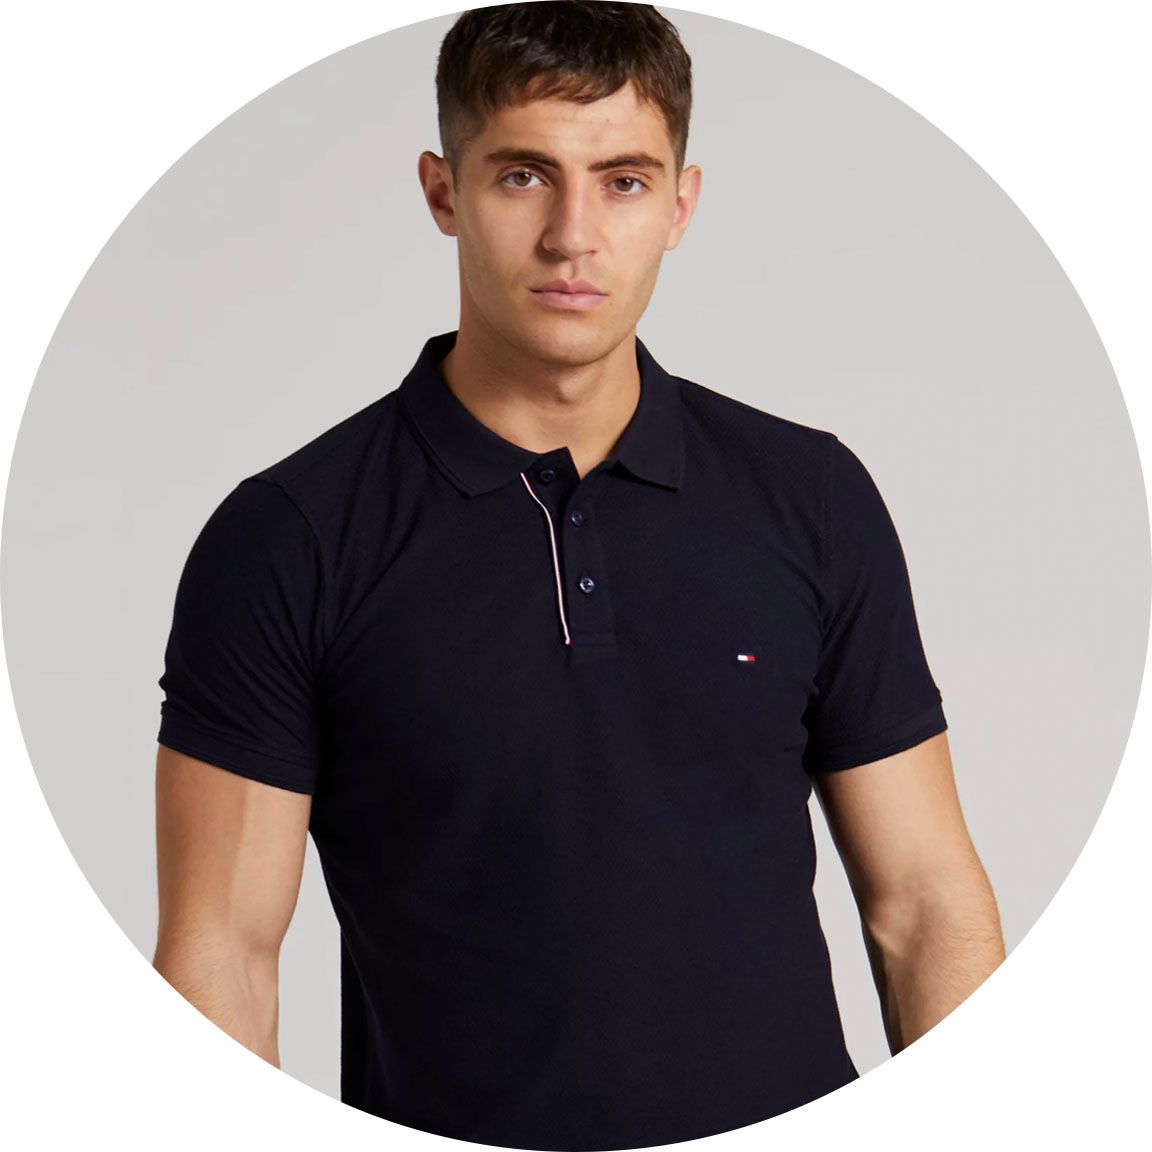 Polo Shirts Offers